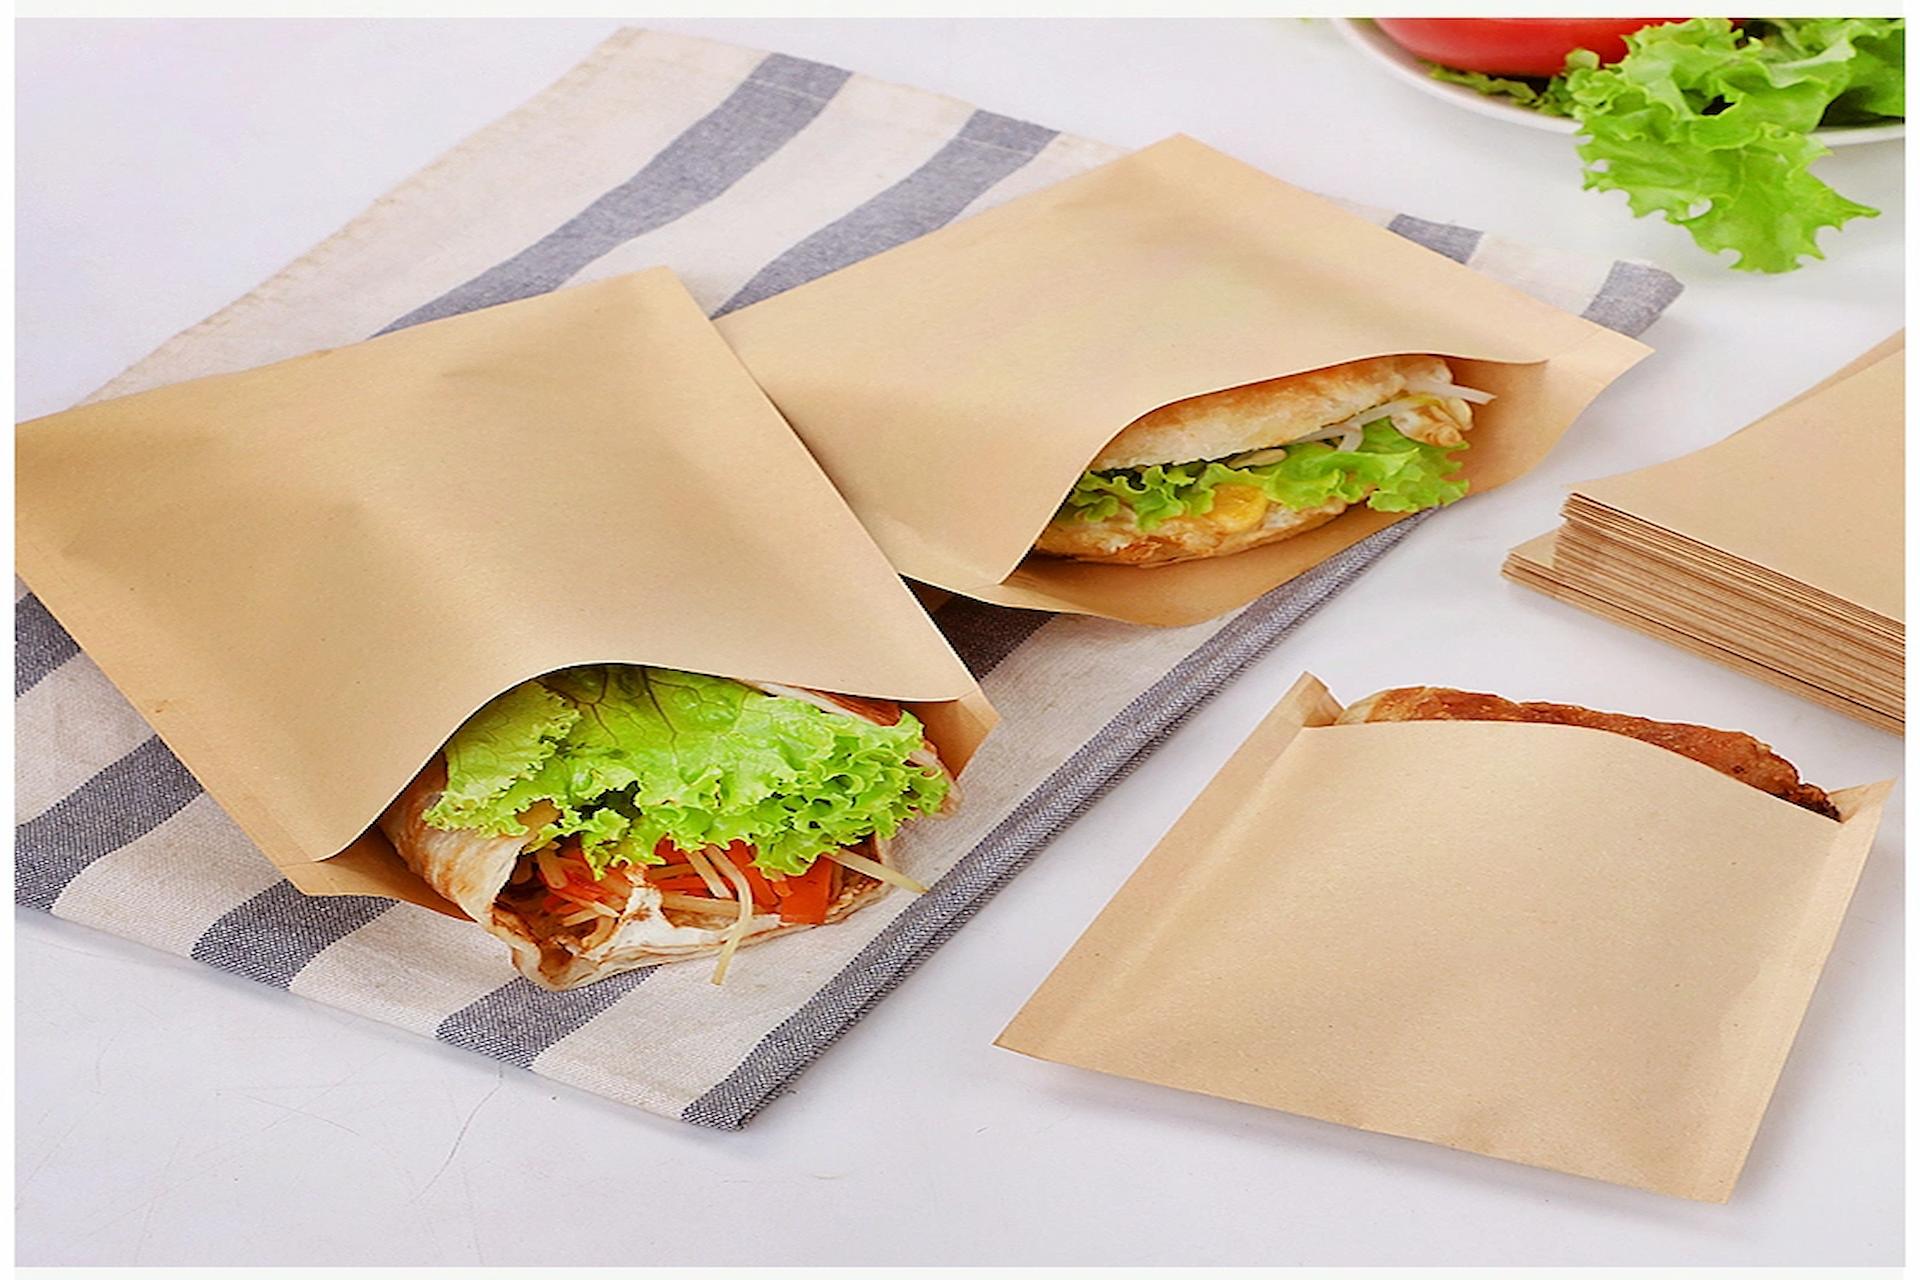 The Perfect On-The-Go Companion: Convenience of Paper Sandwich Bags